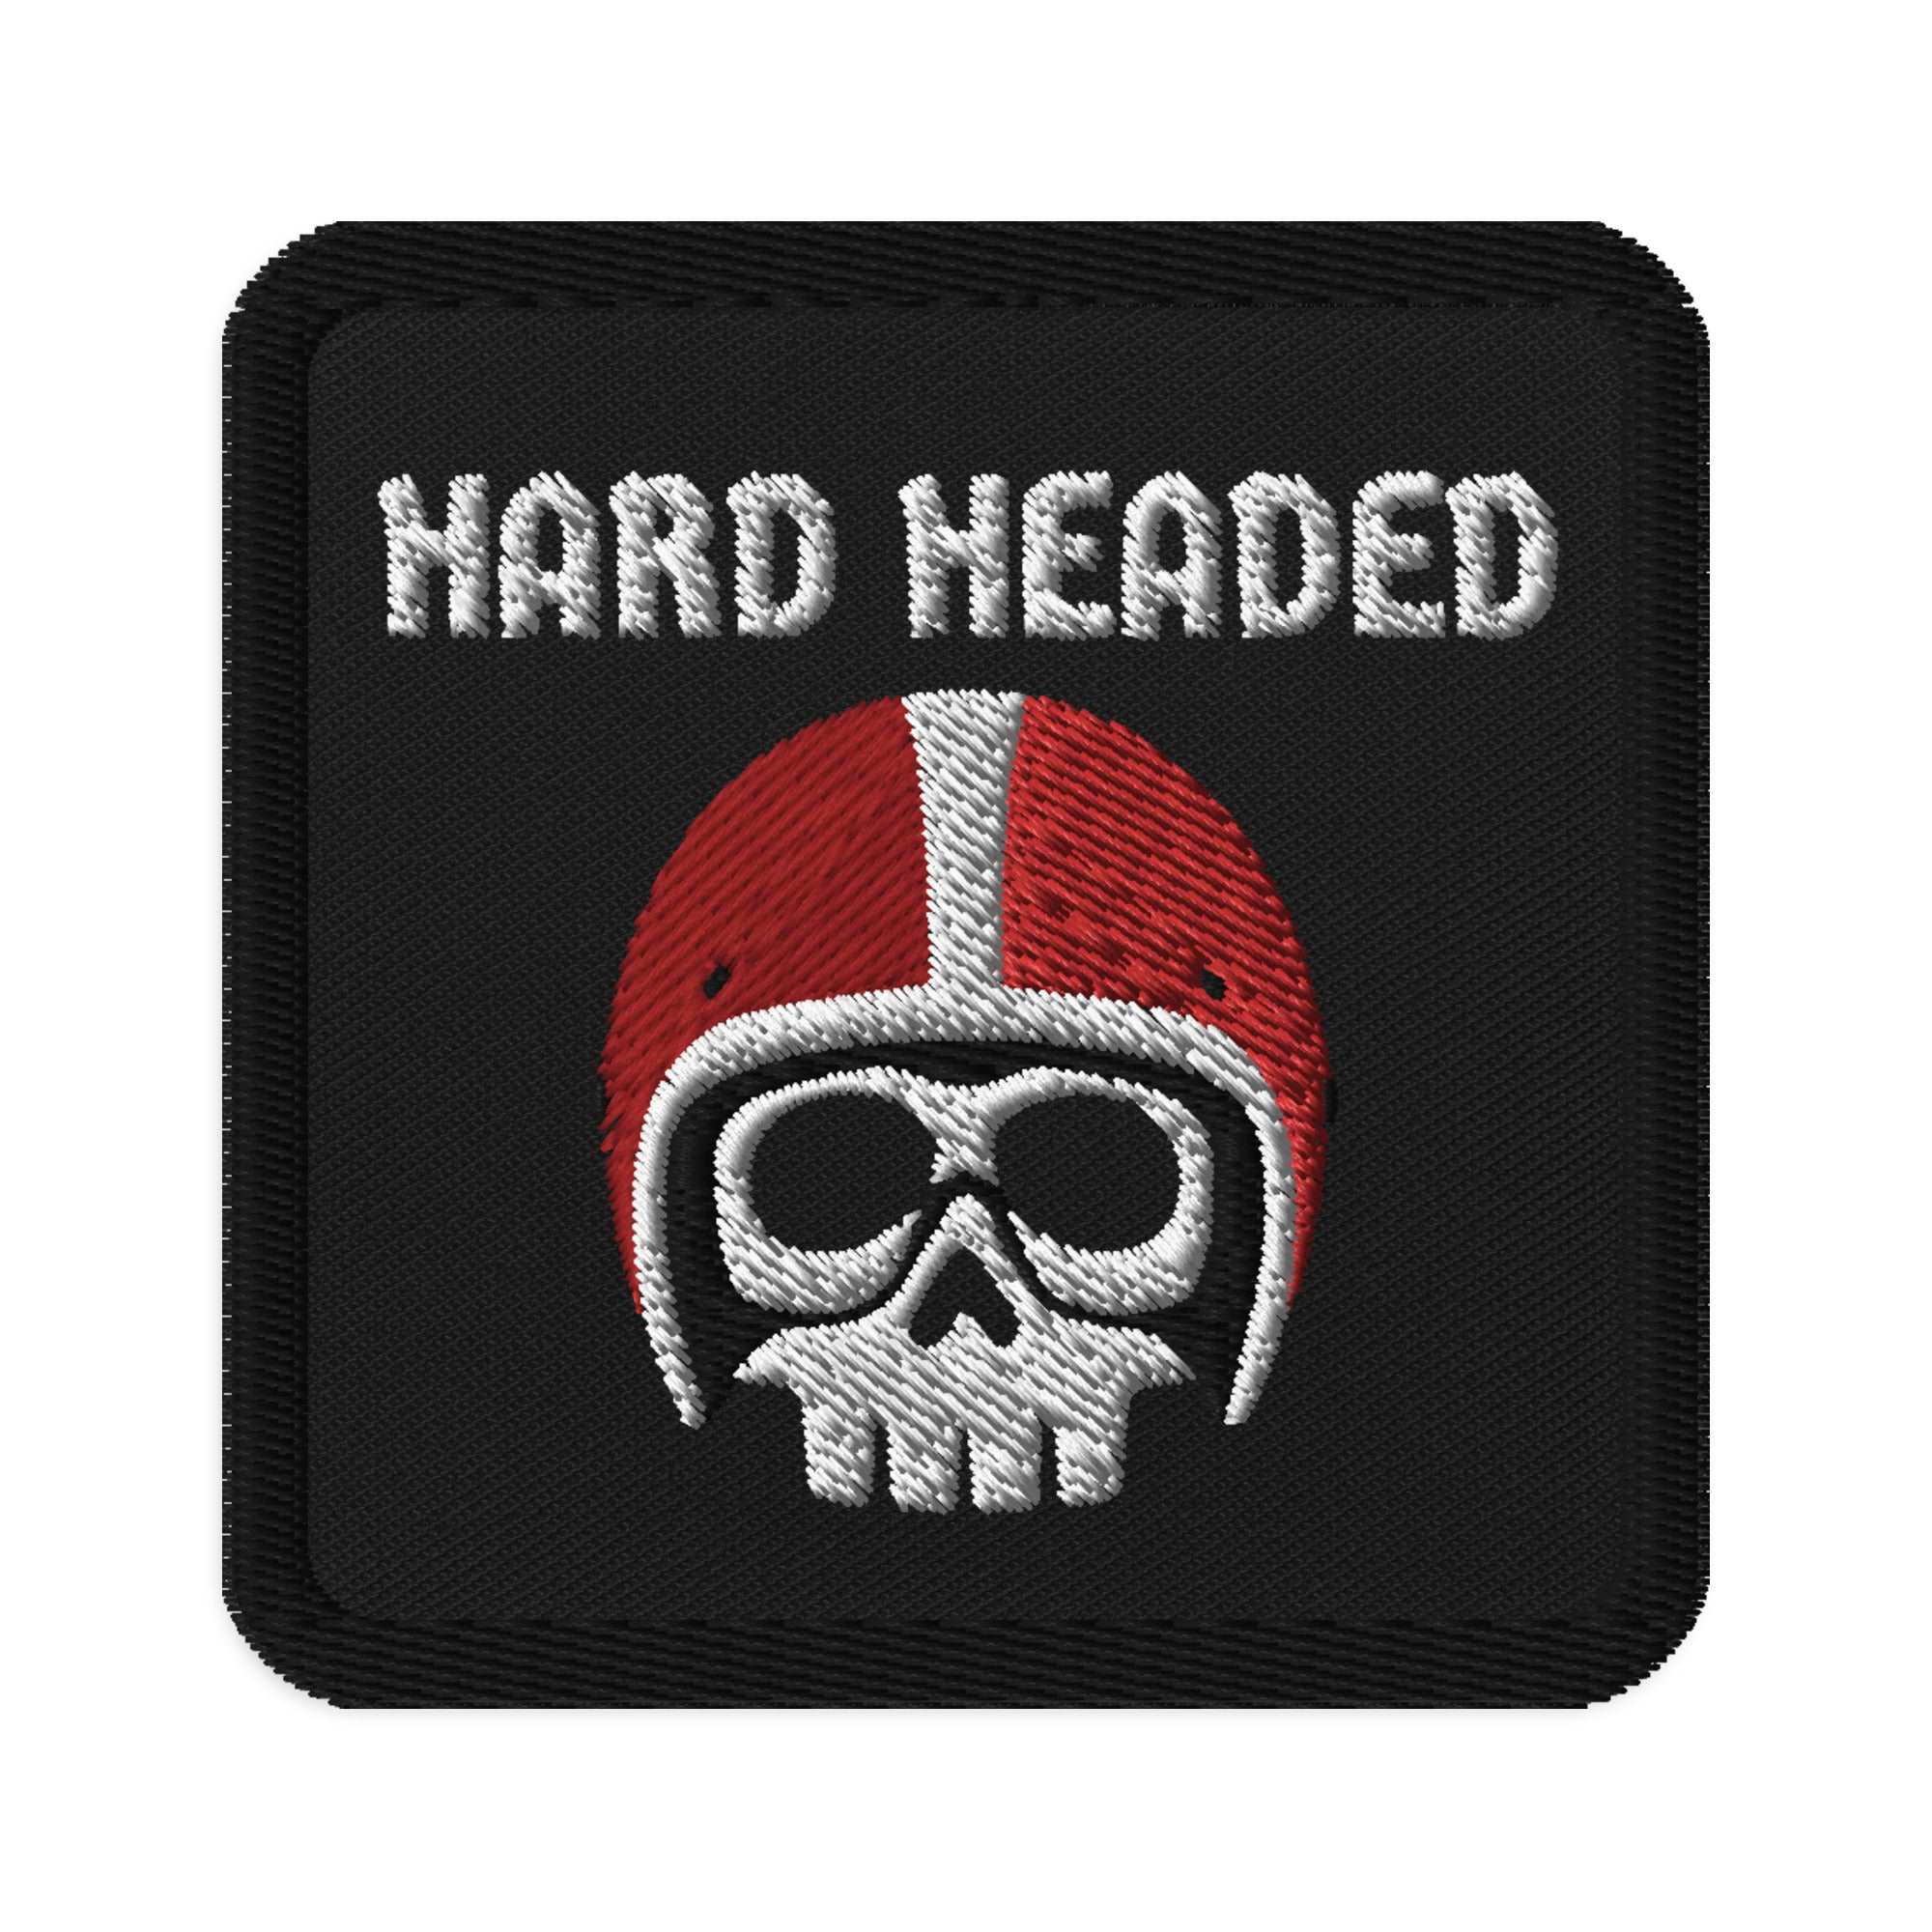 Hard Headed Embroidered Patch